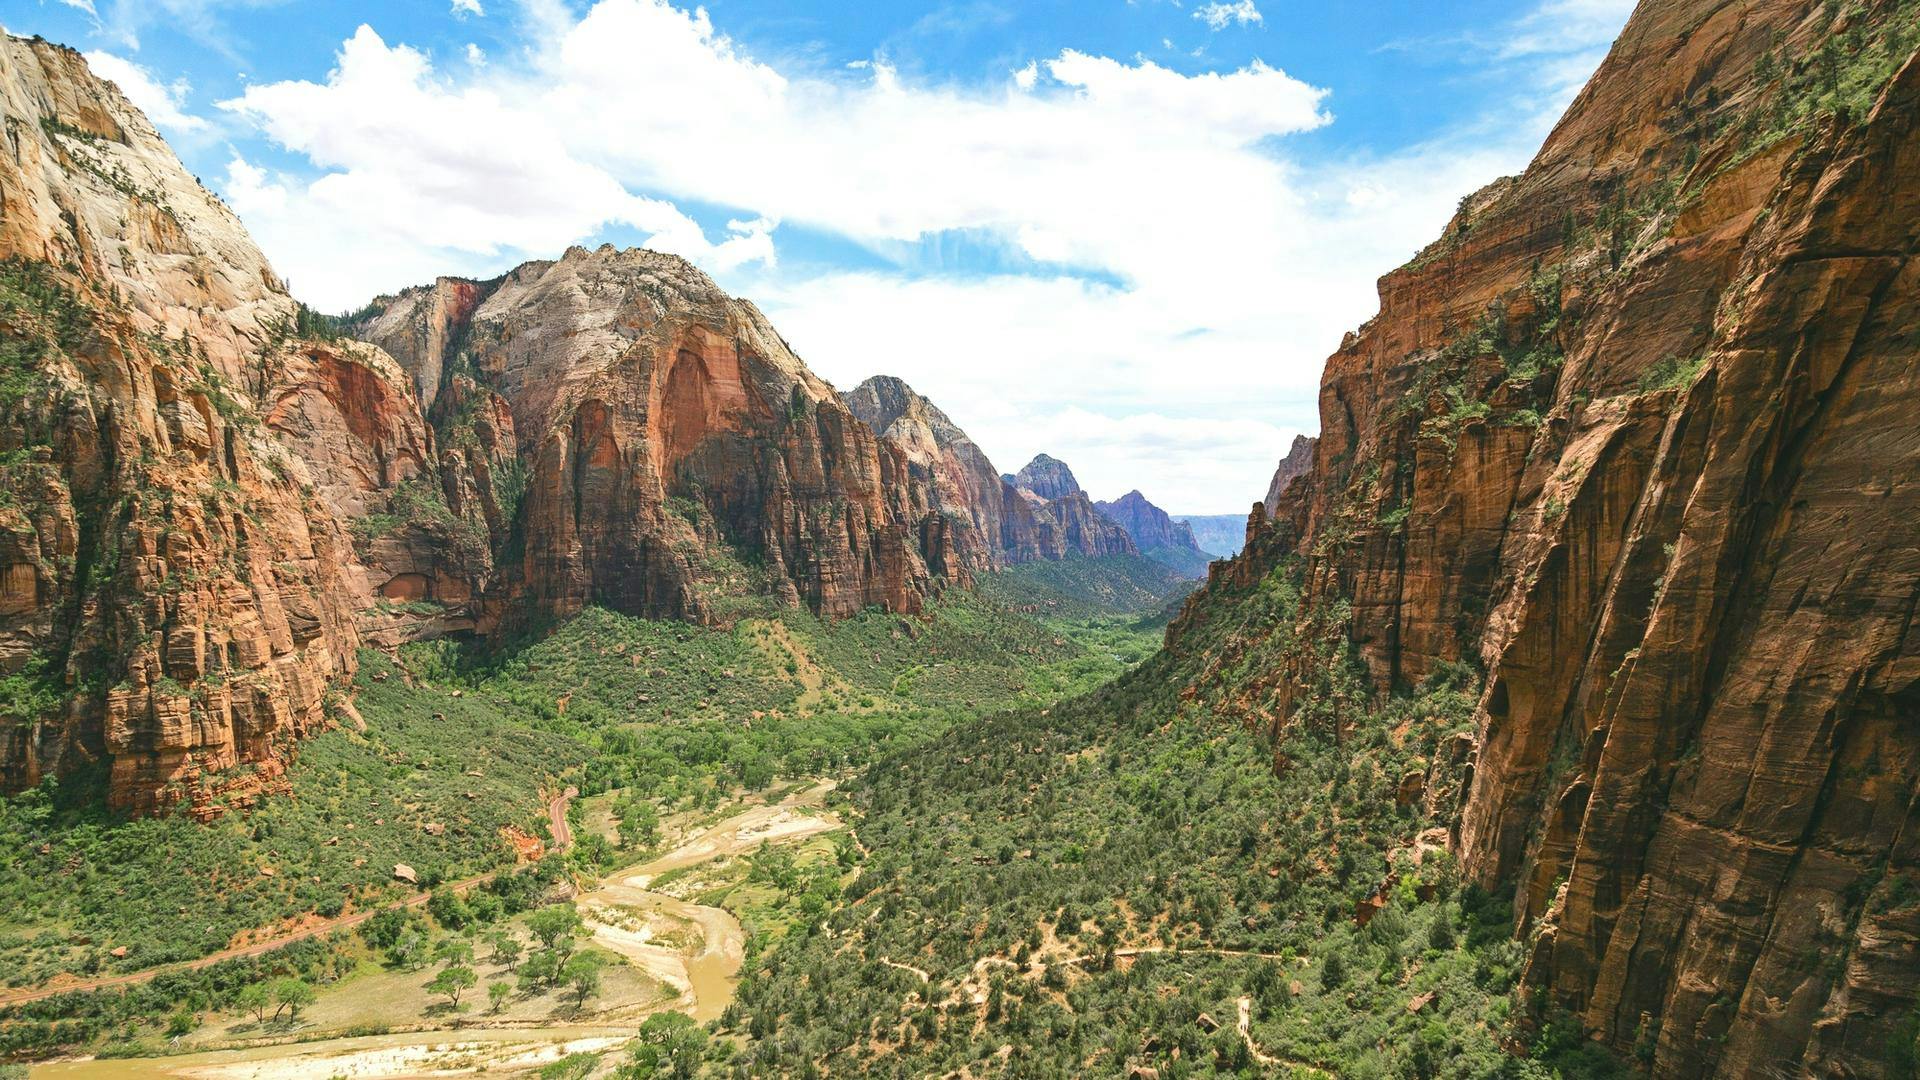 Green valley and red rock formations at Zion National Park.